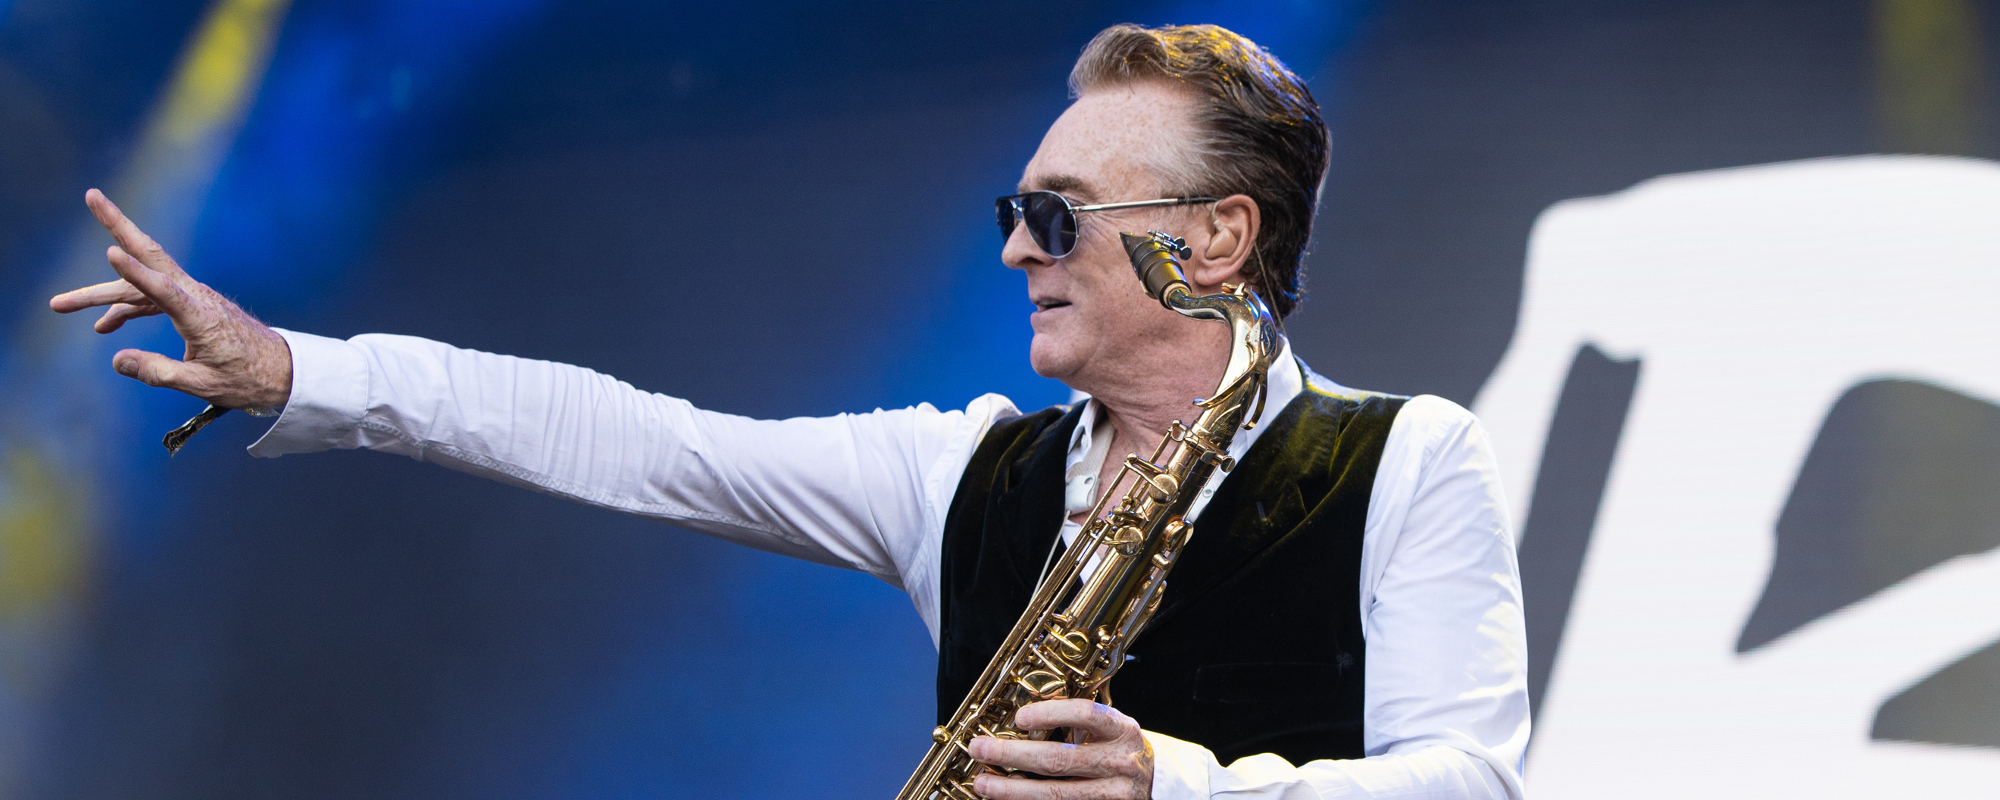 UB40’s Brian Travers Passes Away After Cancer Battle